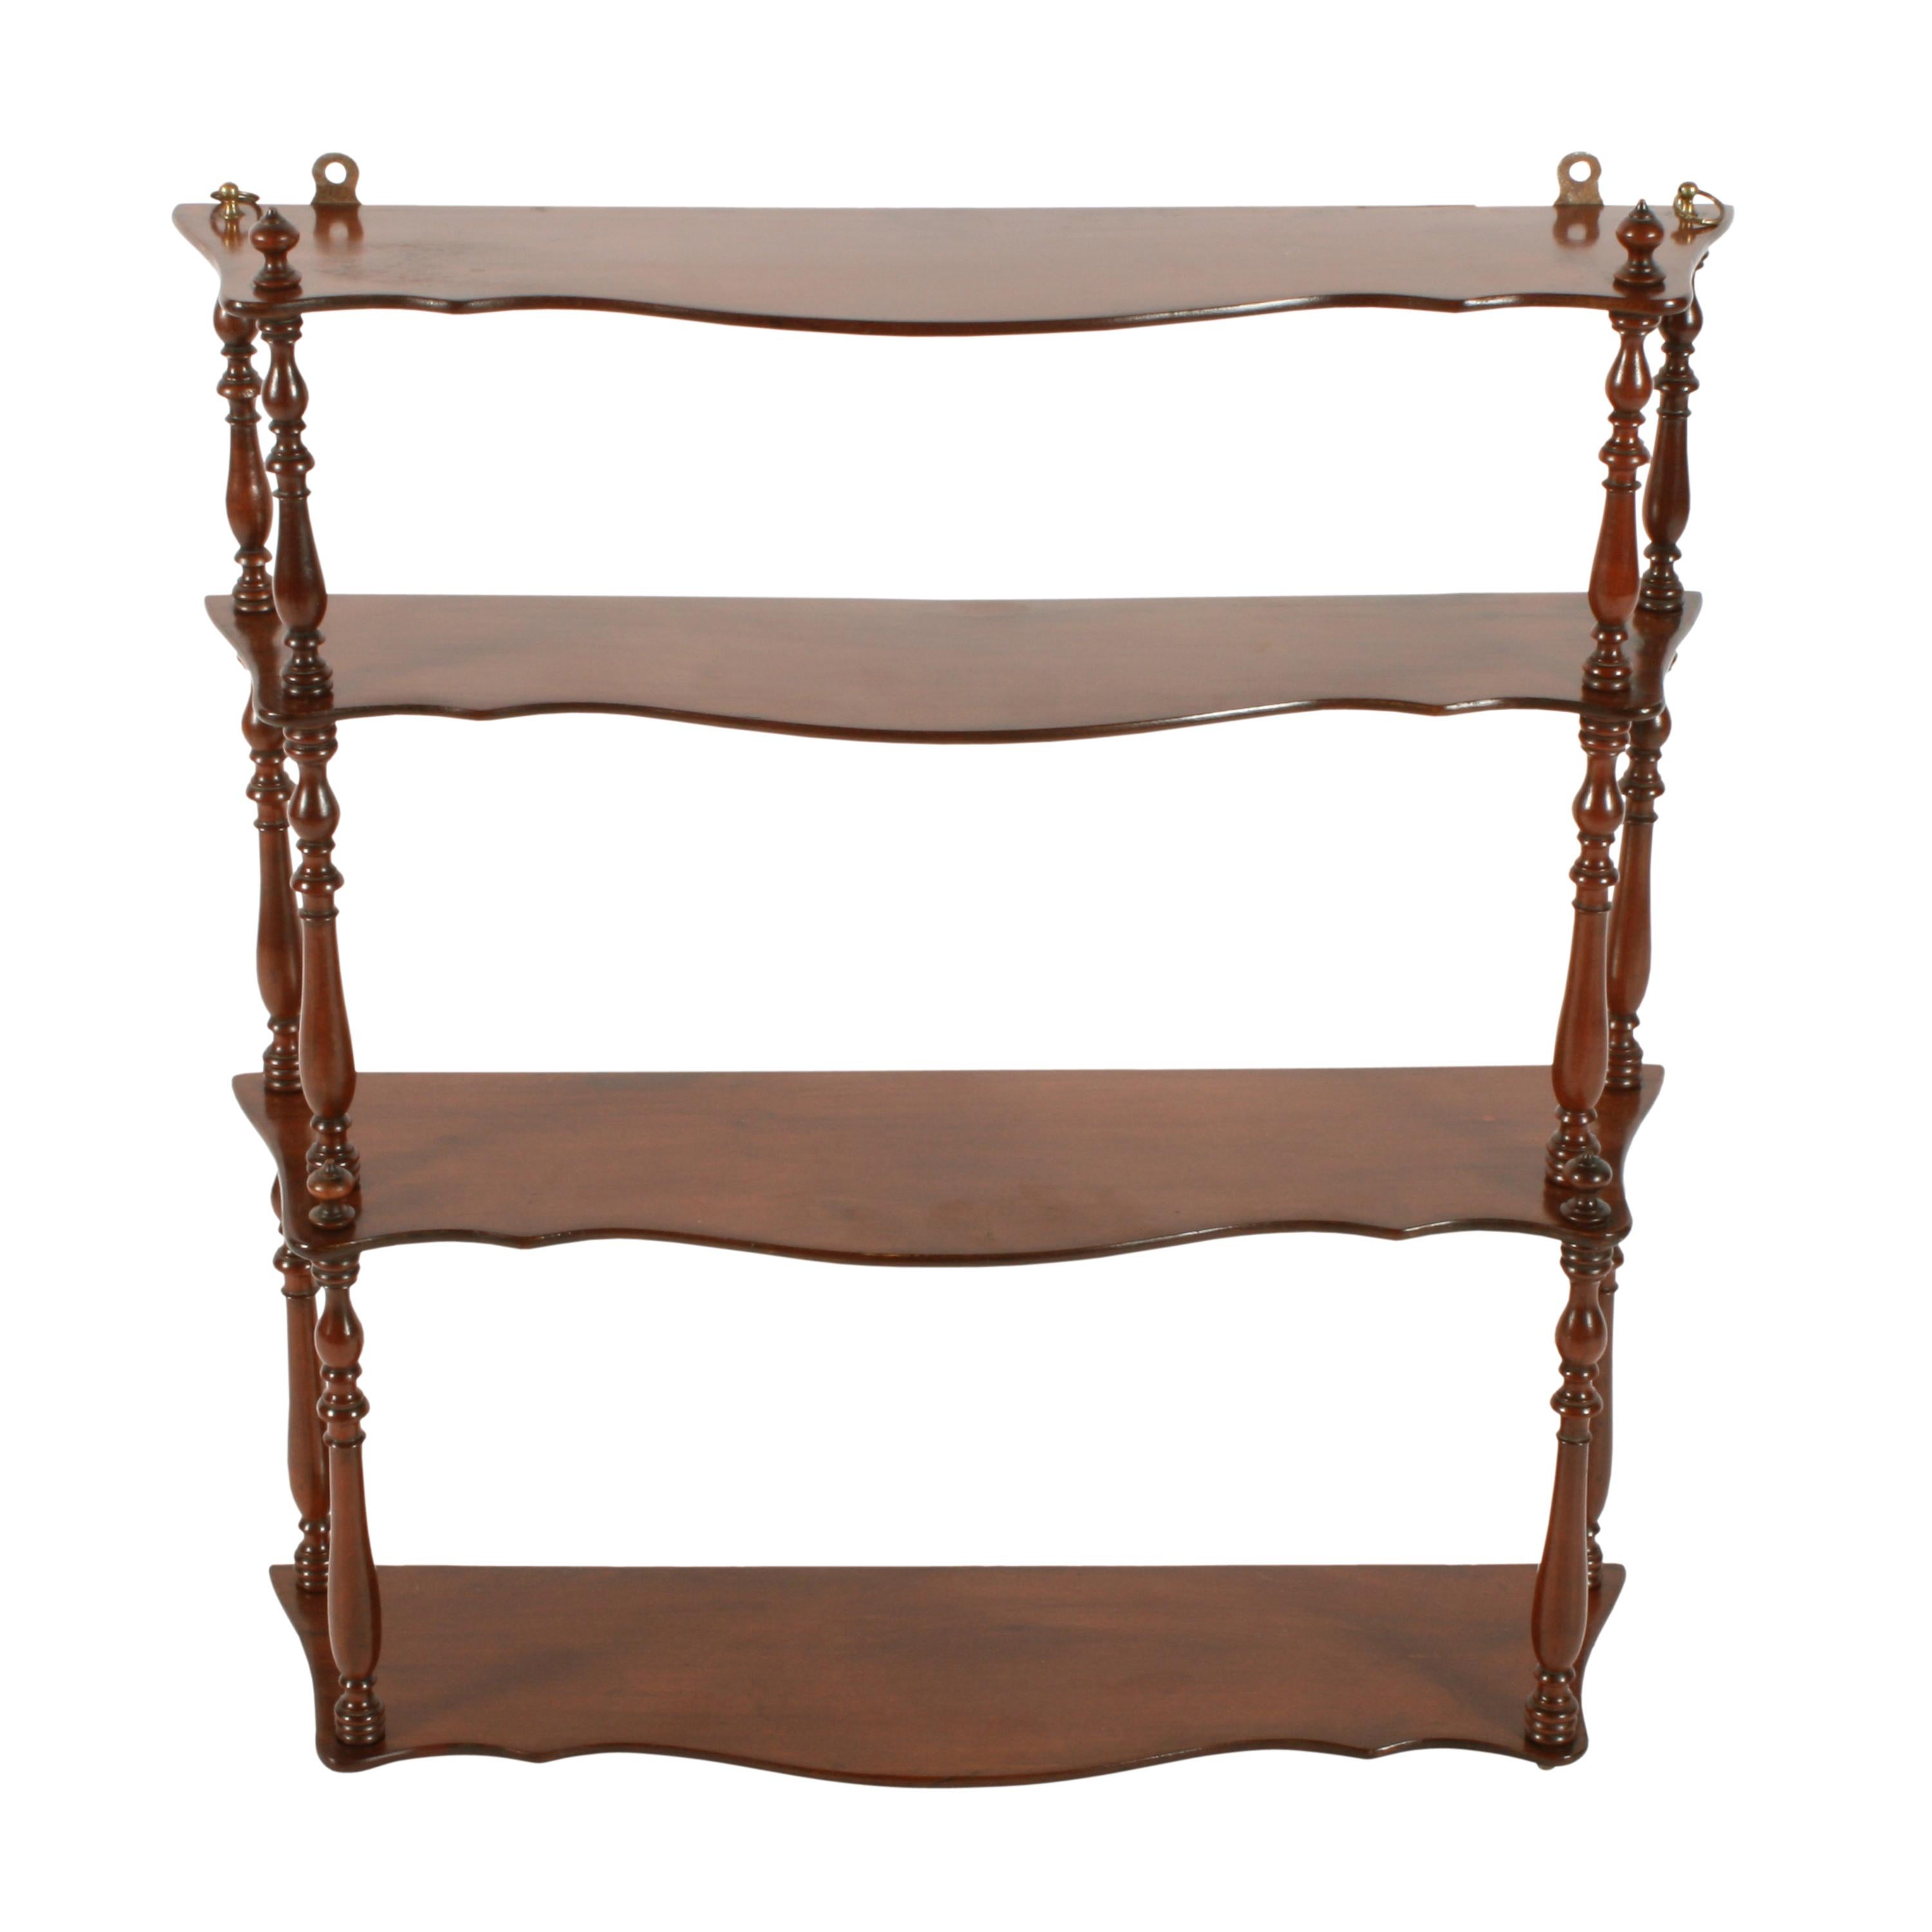 English Serpentine Shaped Wall Shelves For Sale